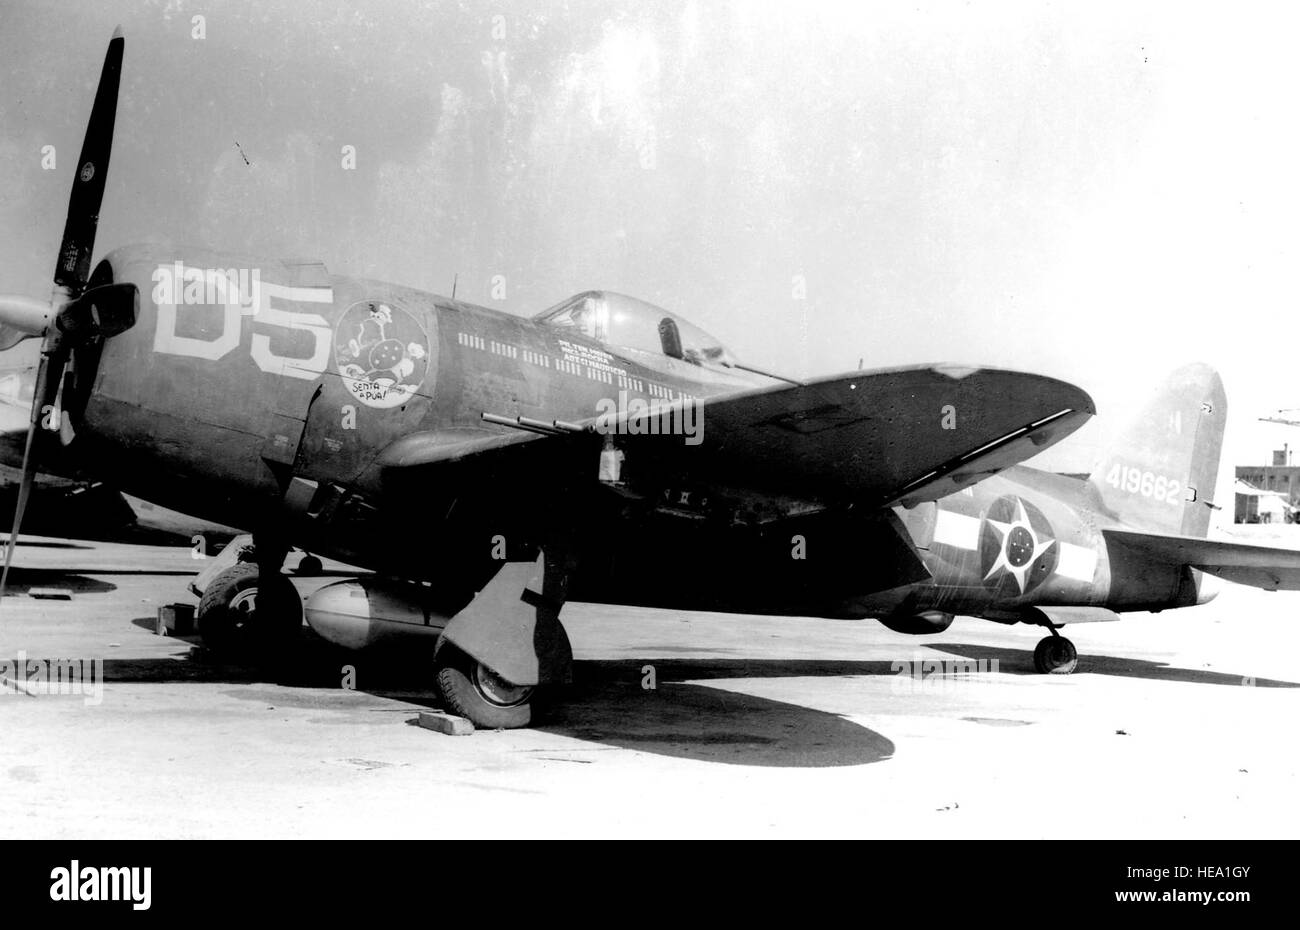 1º GAC P-47s carried the Senta a Pύa! emblem as nose art along with the national insignia of Brazil. (U.S. Air Force photo) Stock Photo